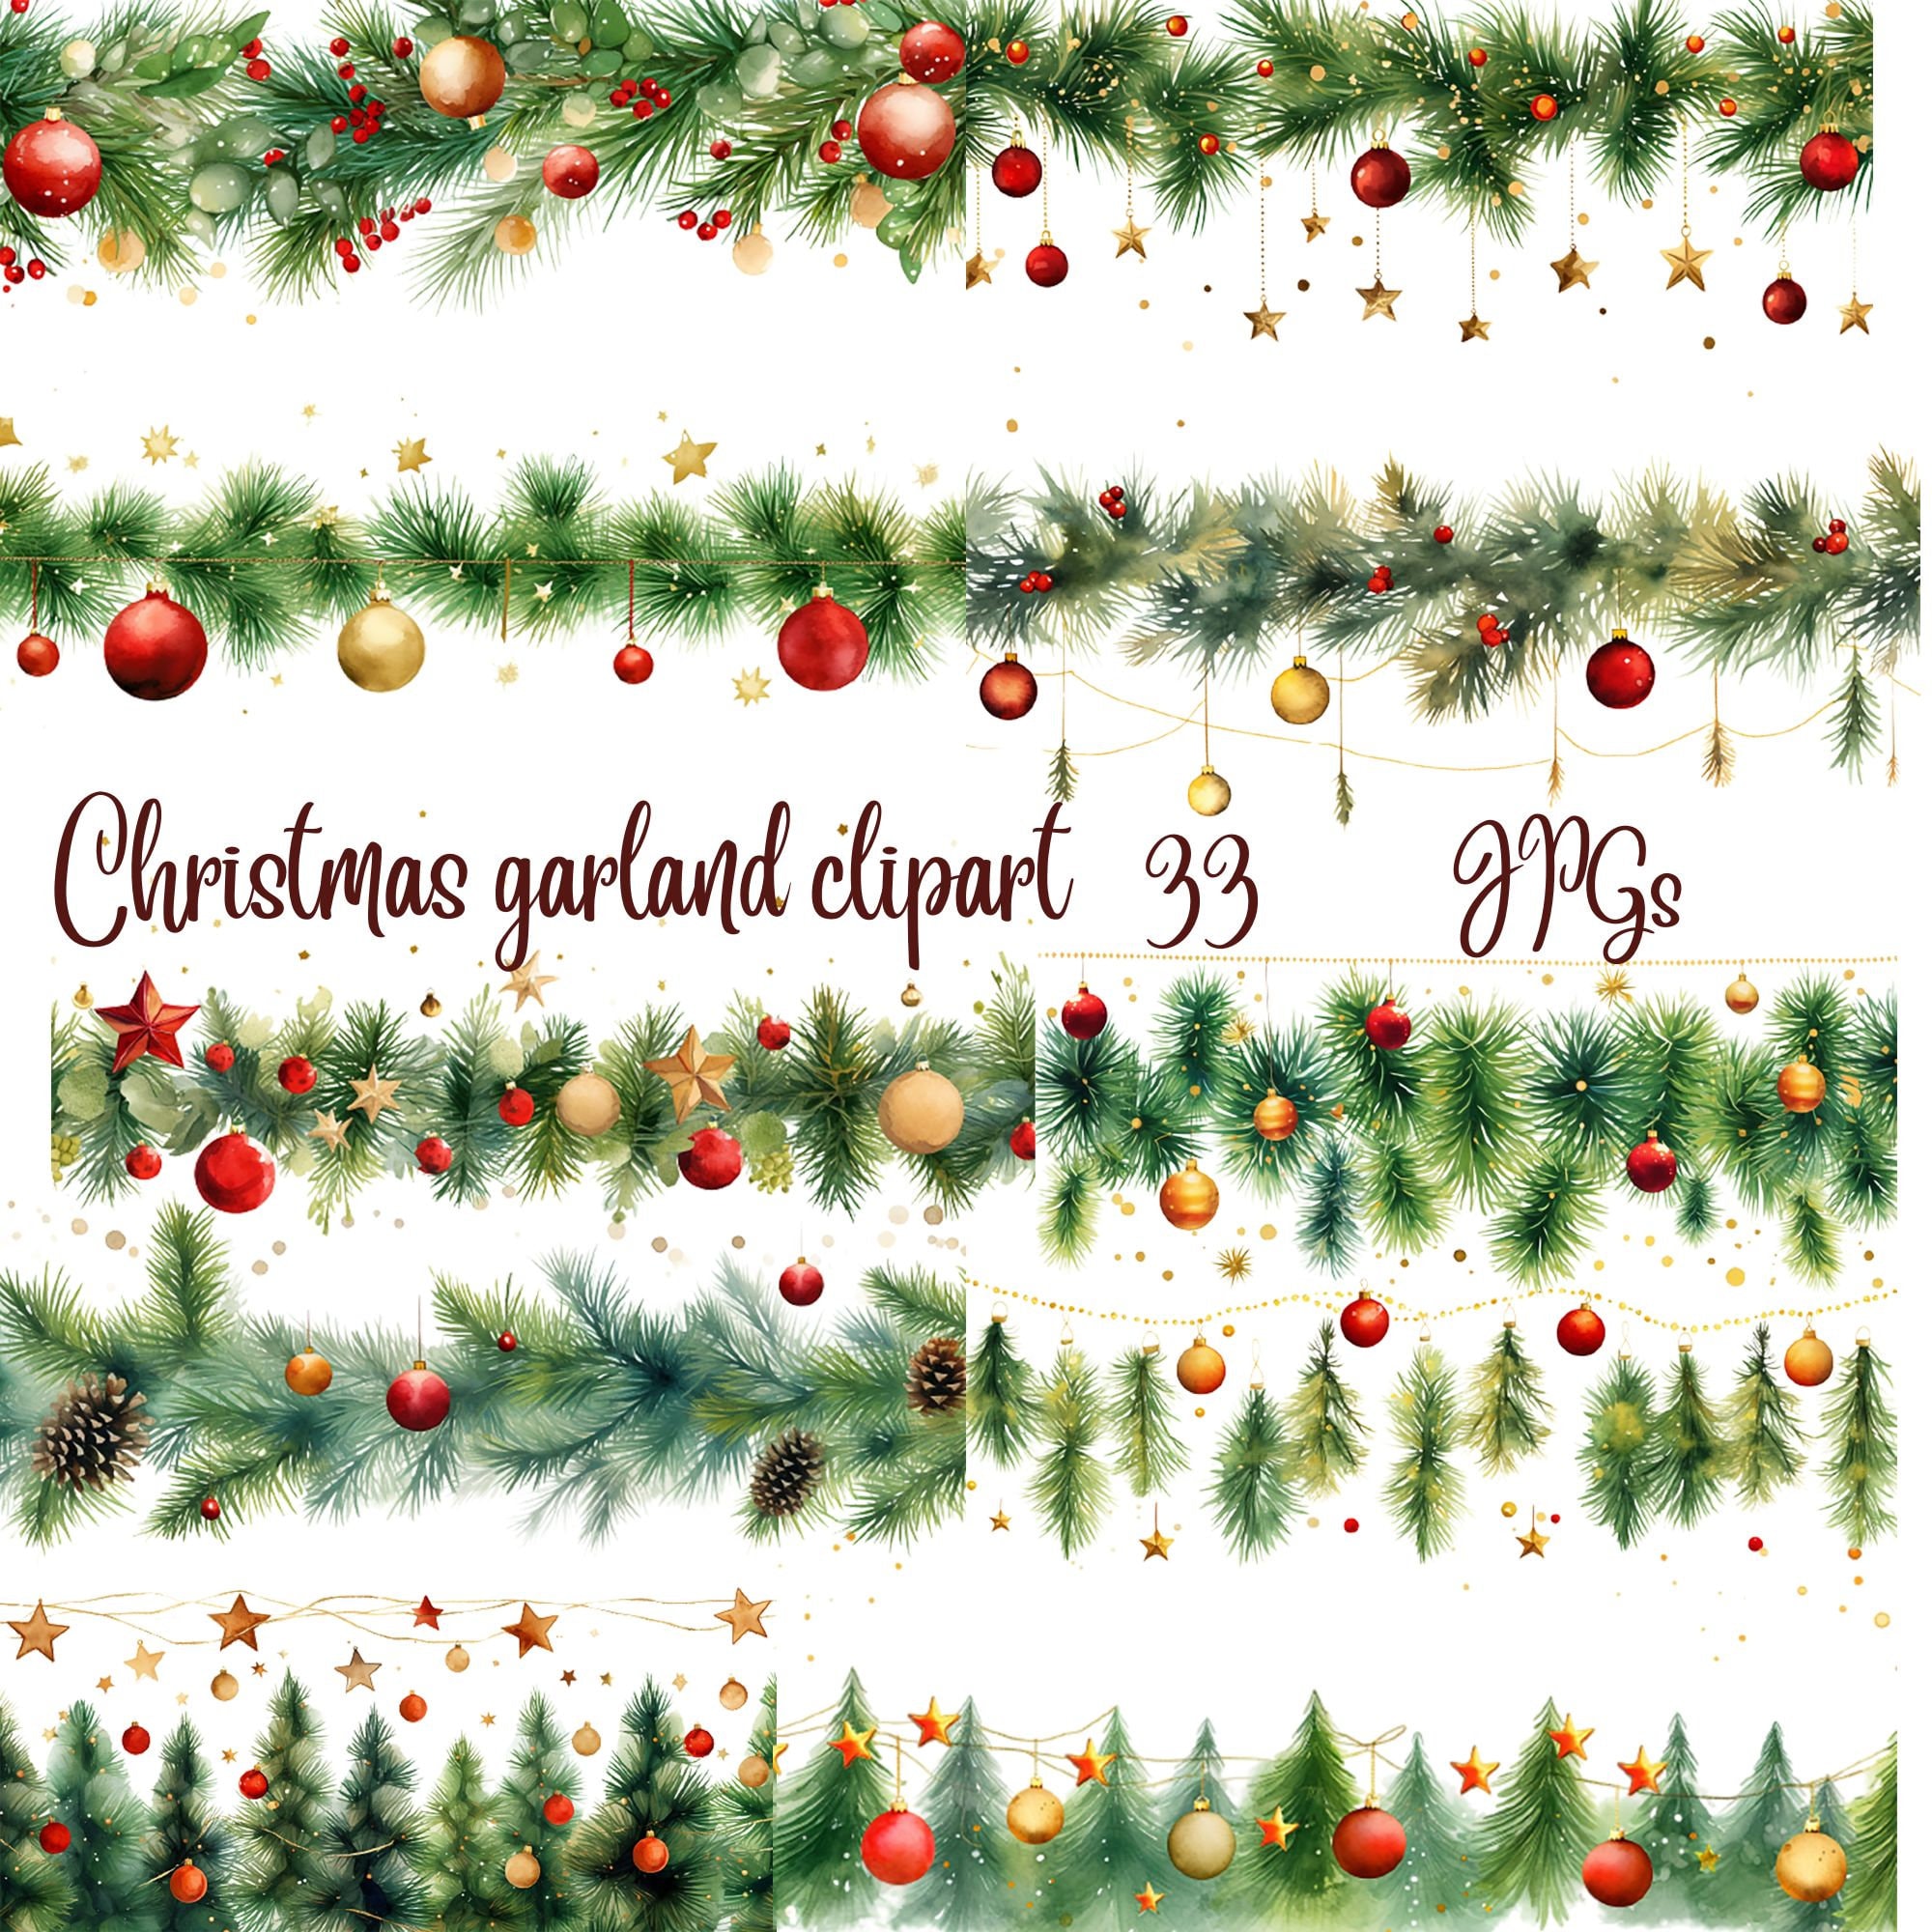 Watercolor Christmas Mail Clipart  Christmas watercolor, Christmas mail,  Christmas present clip art